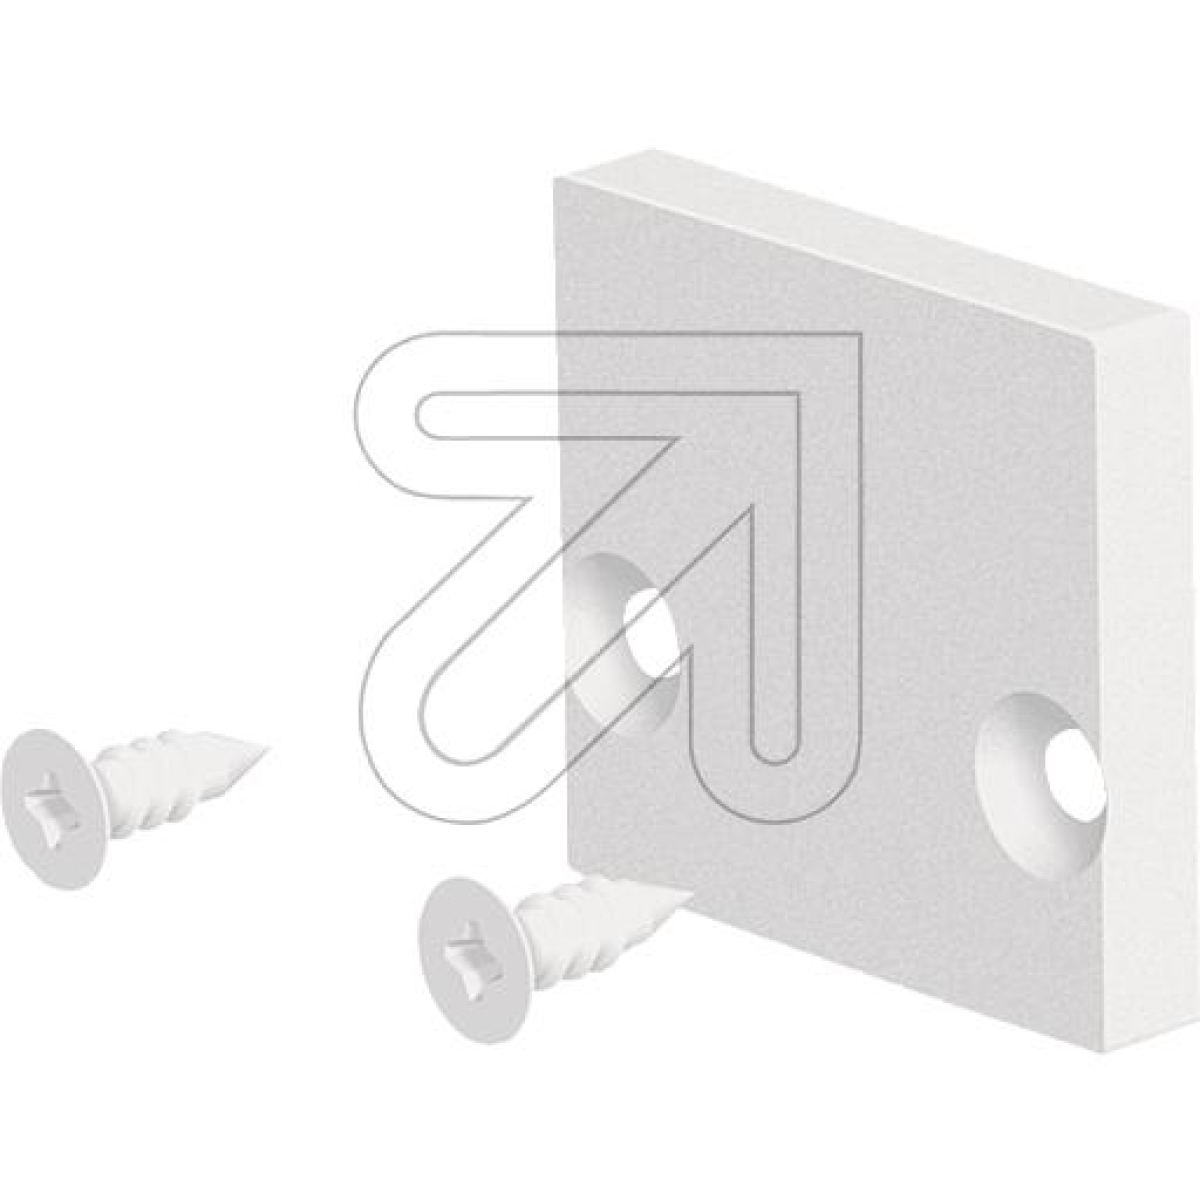 EVNAluminum end cover plate white APFWEAPArticle-No: 686105